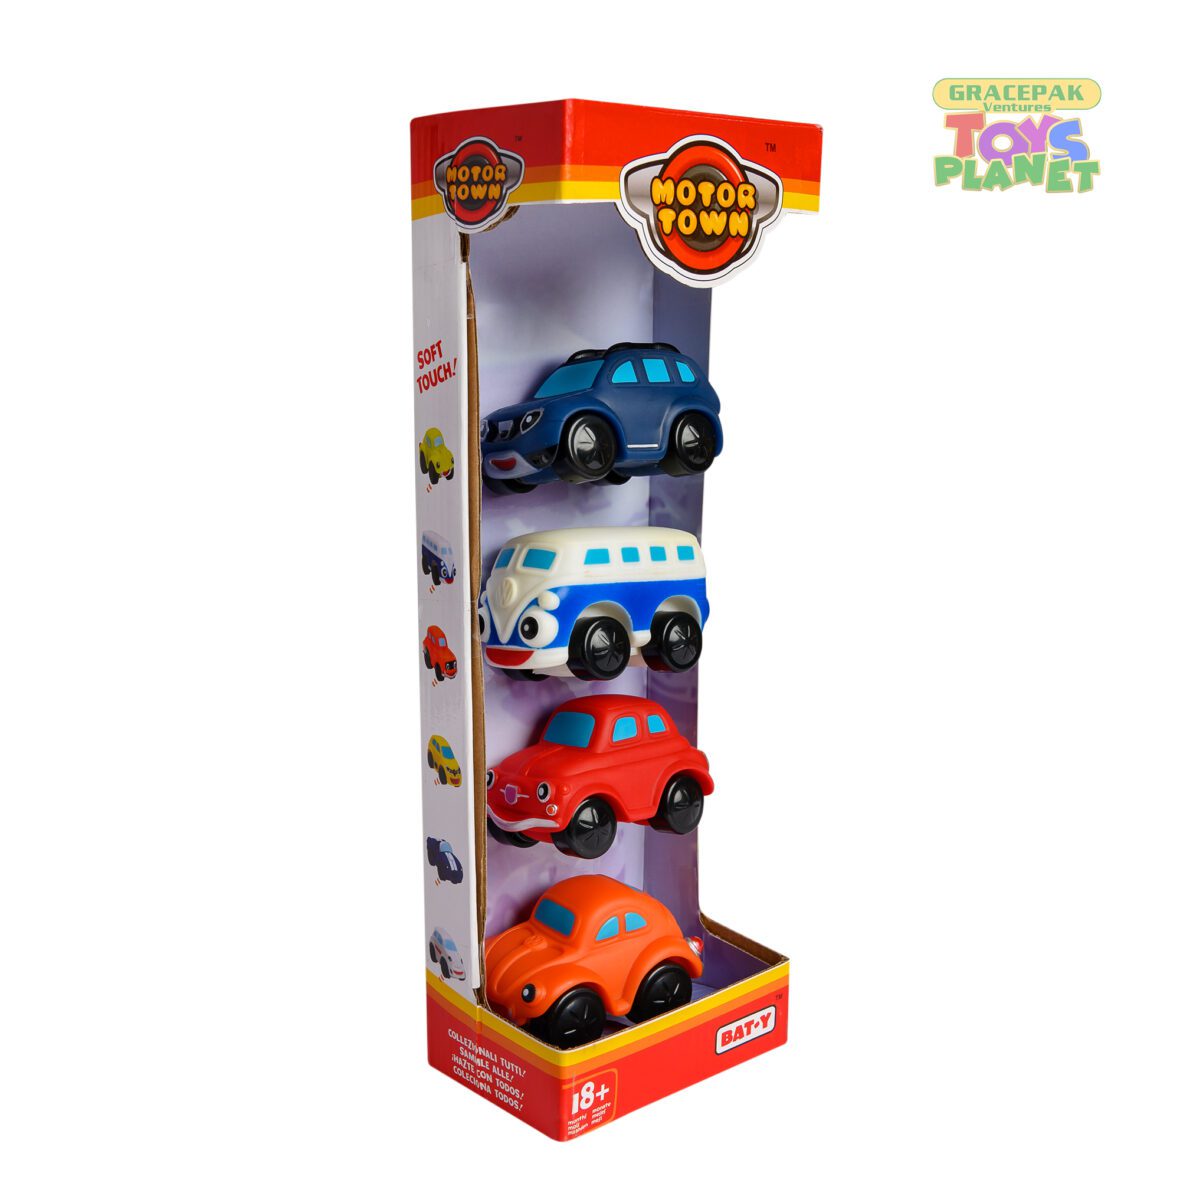 MOTORTOWN 4 Cars Pack-2 Assorted_1